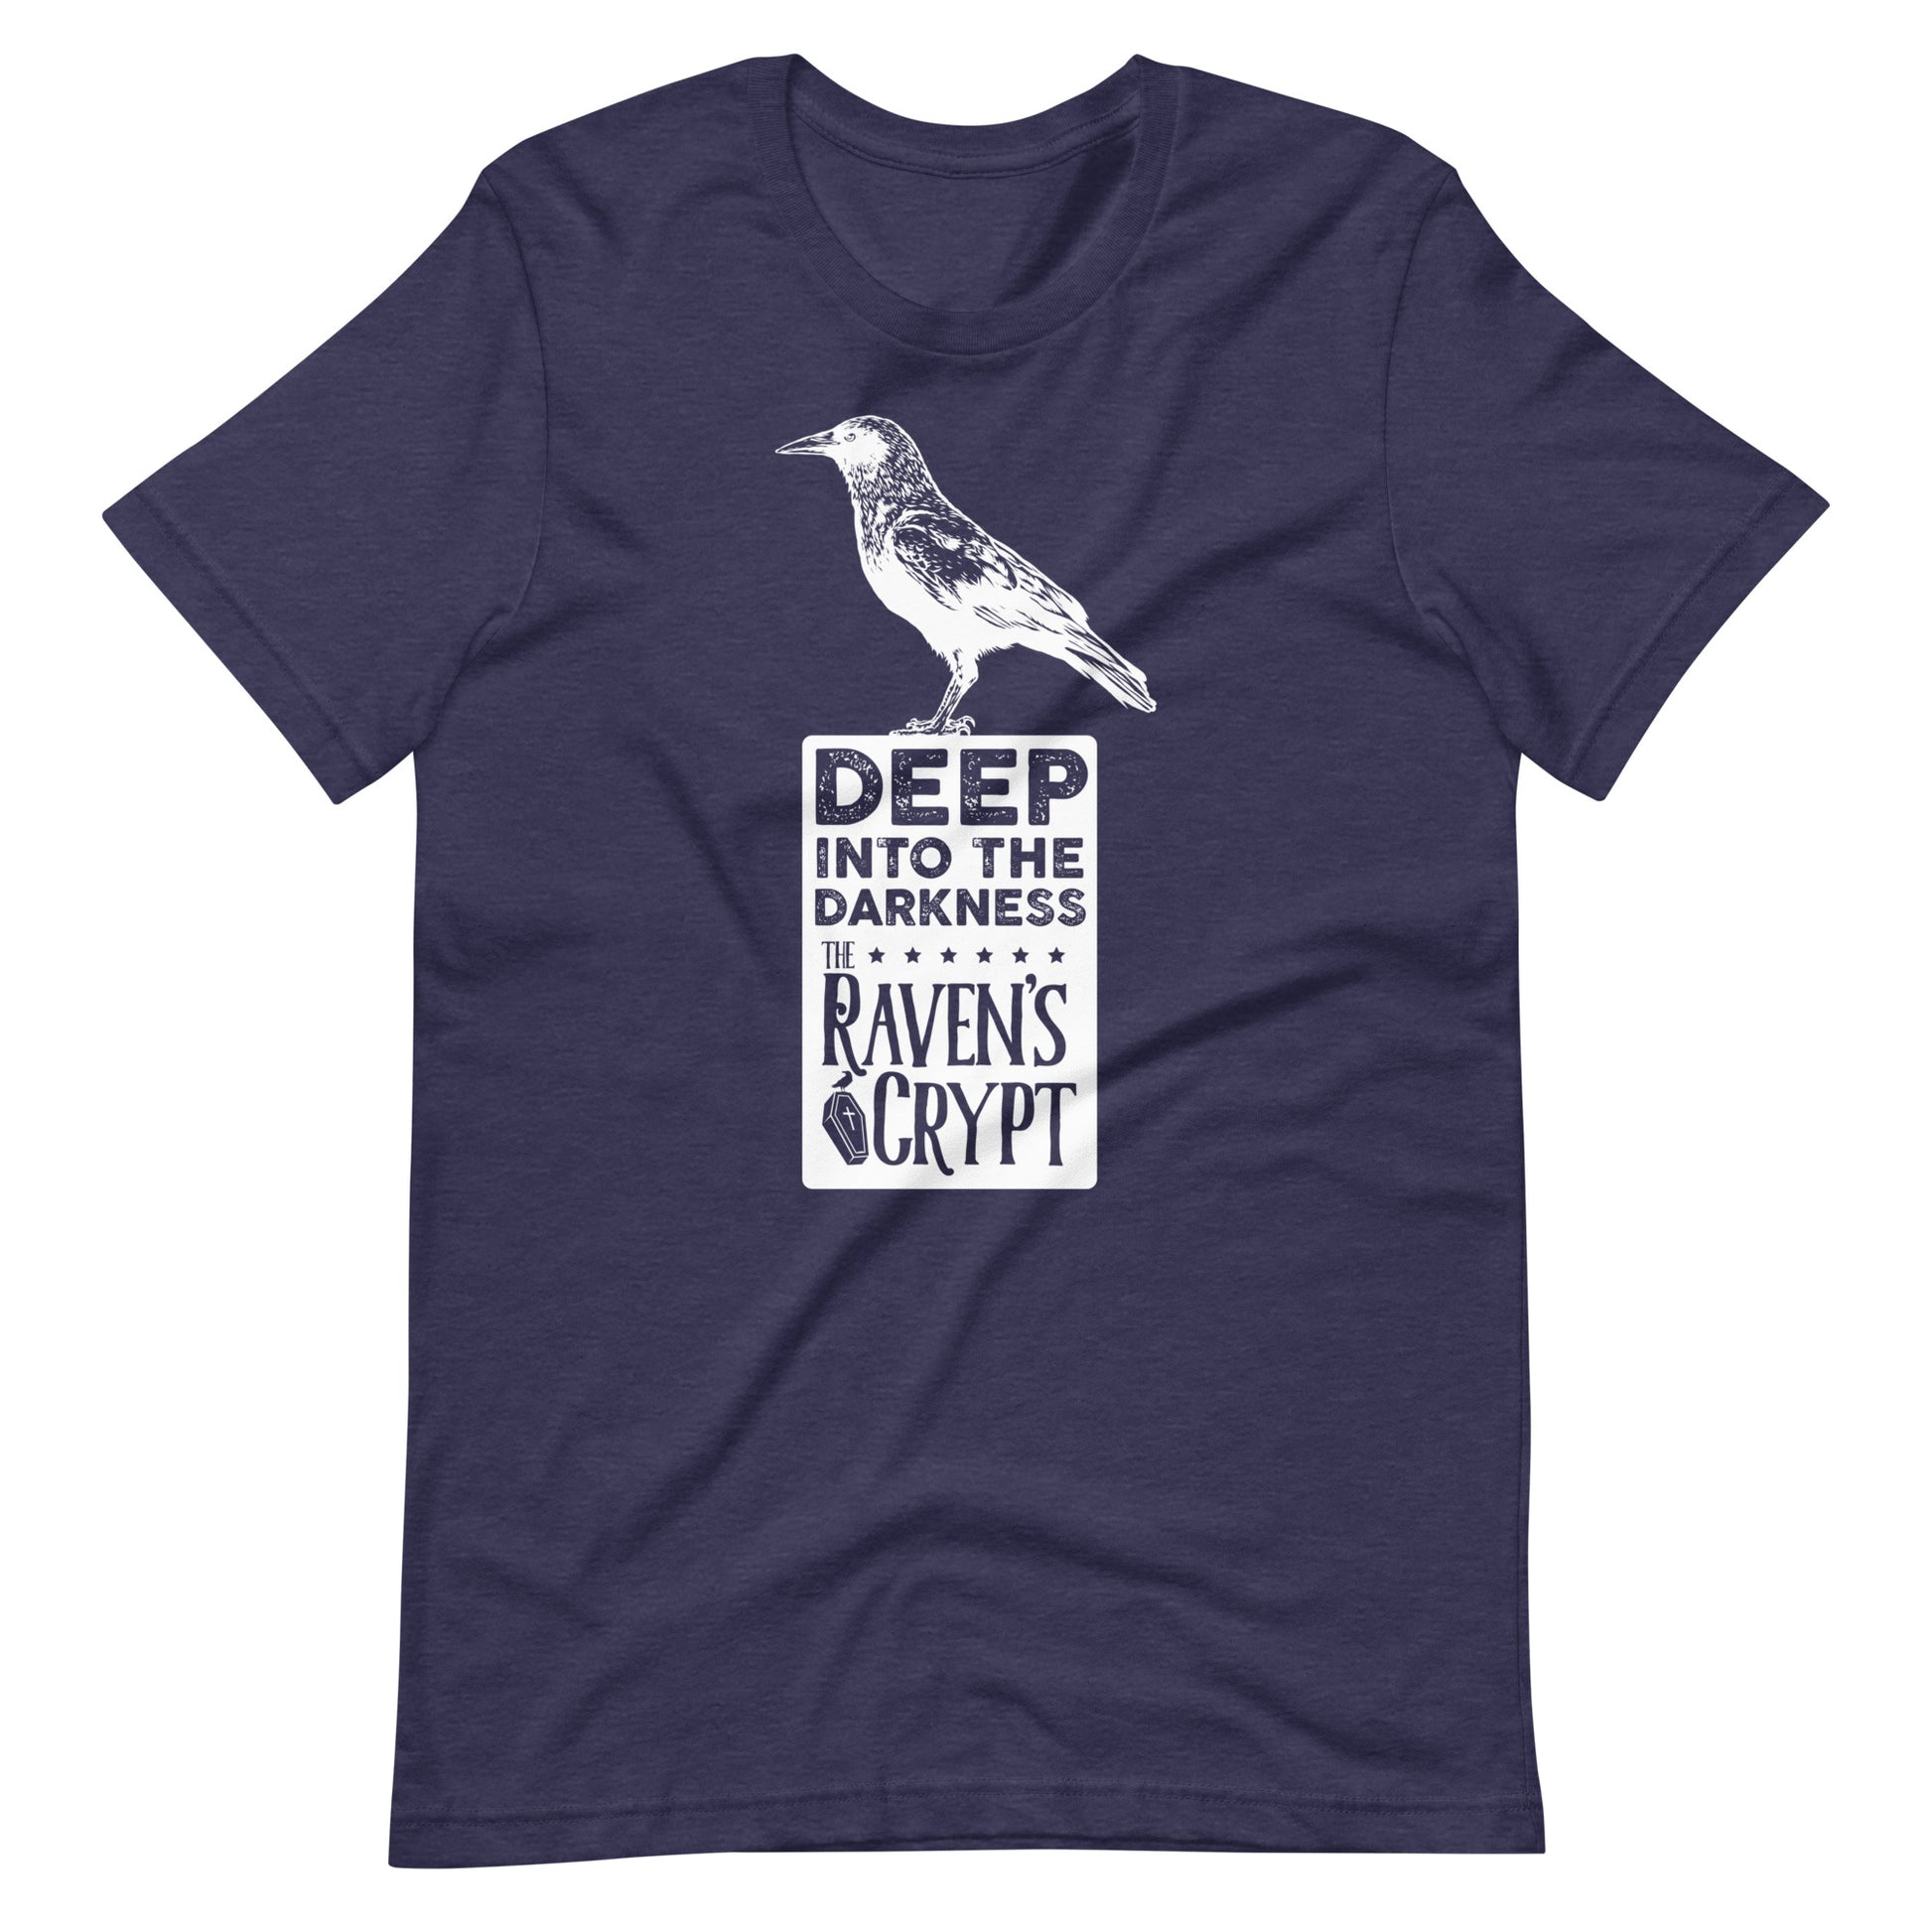 Deep Into the Darkness Crypt 2 - Men's t-shirt - Heather Midnight Navy Front